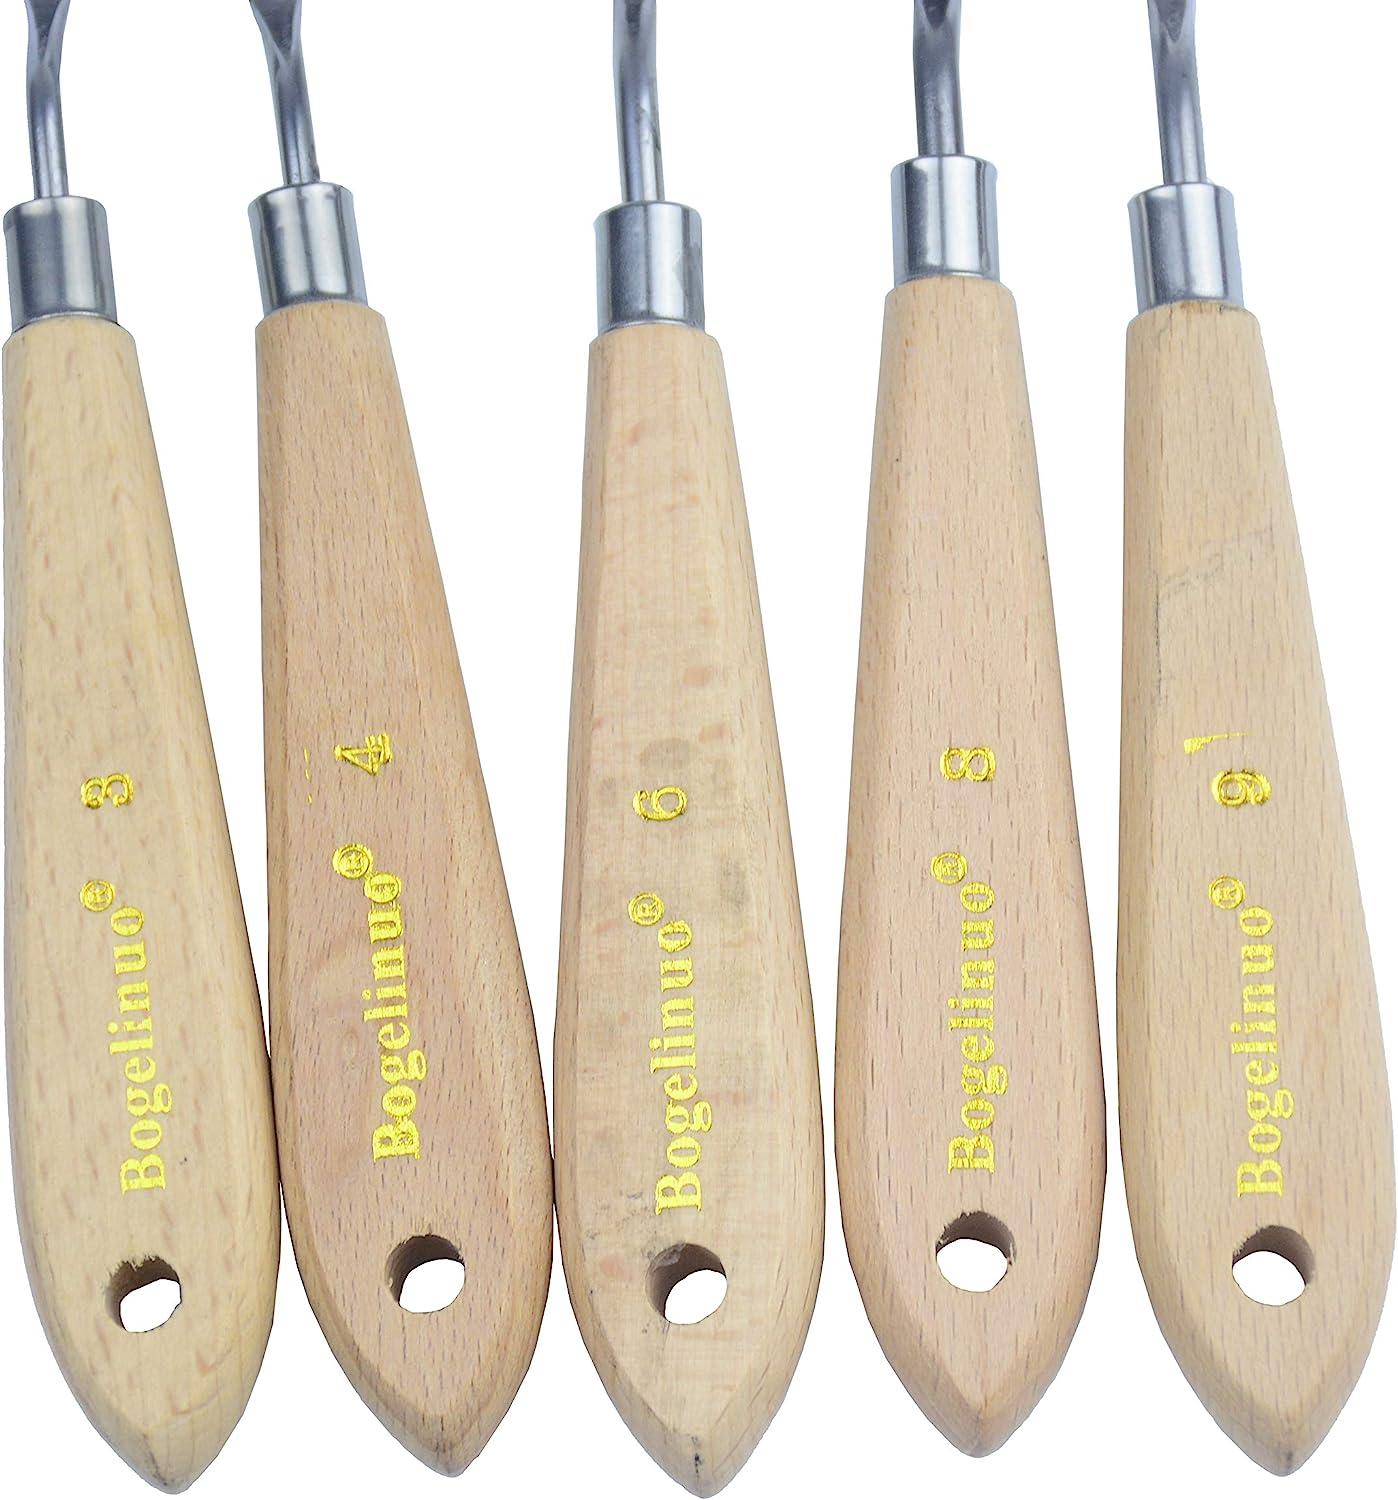 Painting Knife Set, Practical Oil Painting Knife, Durable Portable For  Artists Enthusiasts